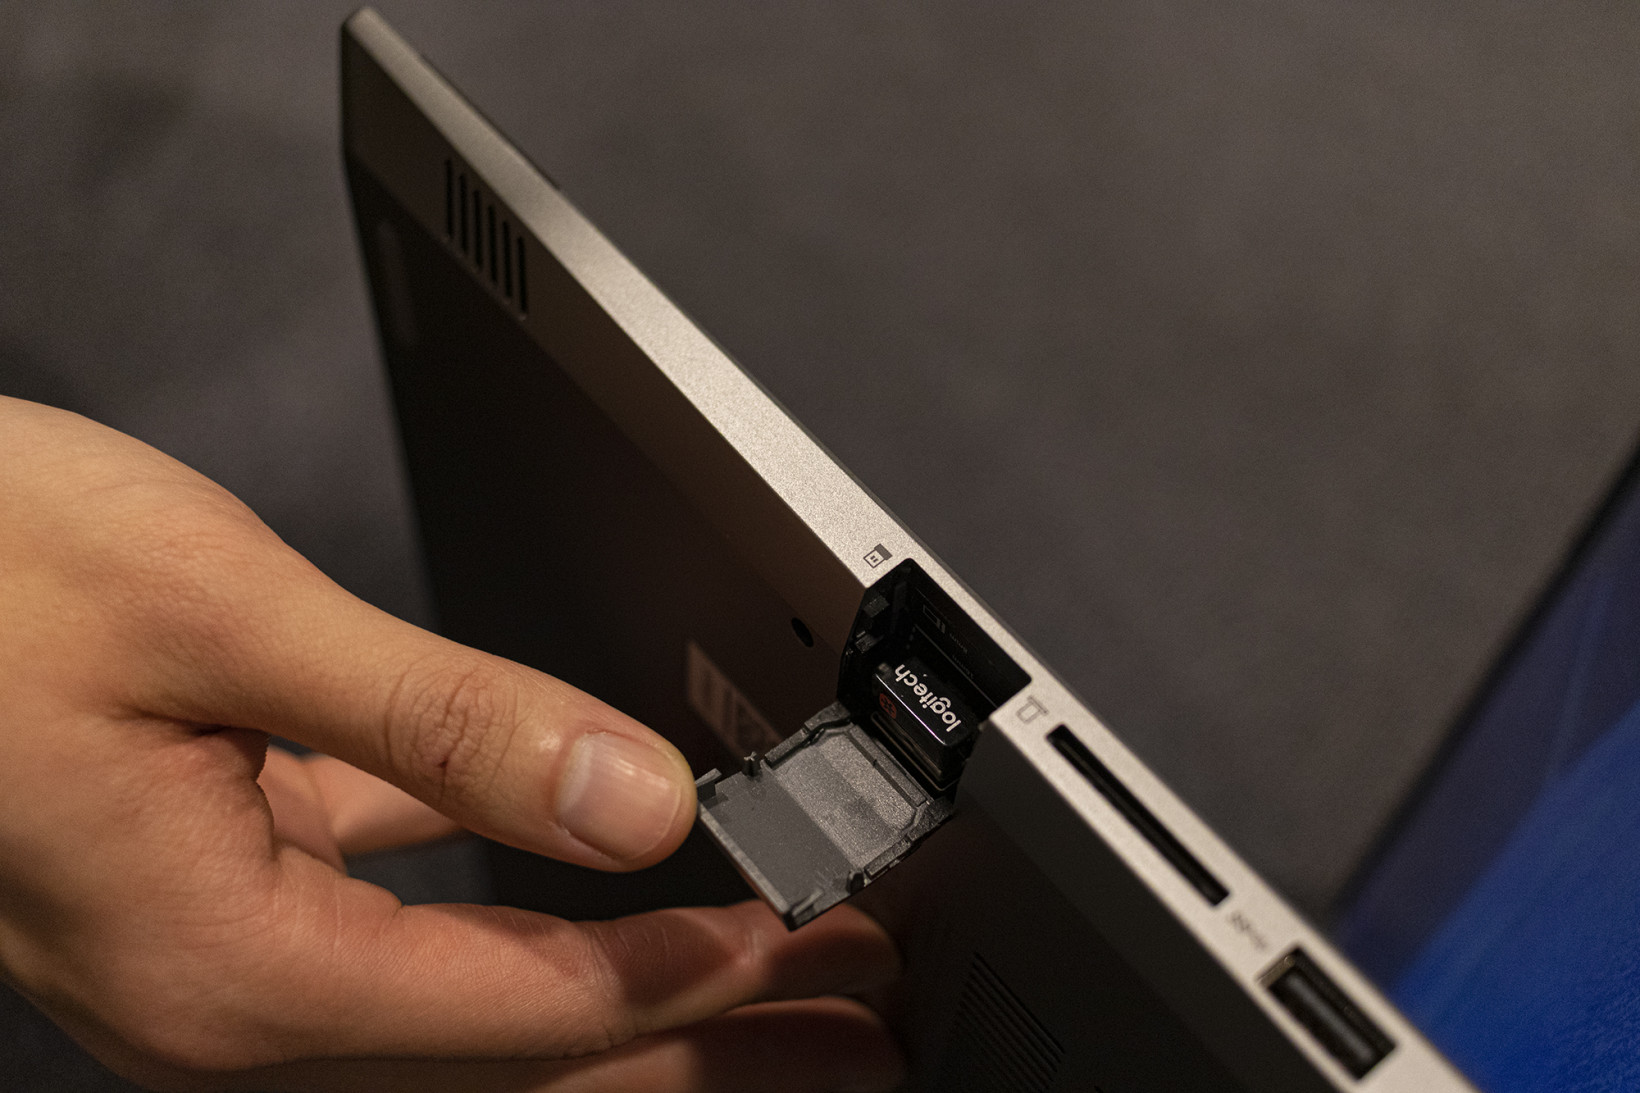 The Lenovo ThinkBook 14 has this neat hideaway slot for USB dongles